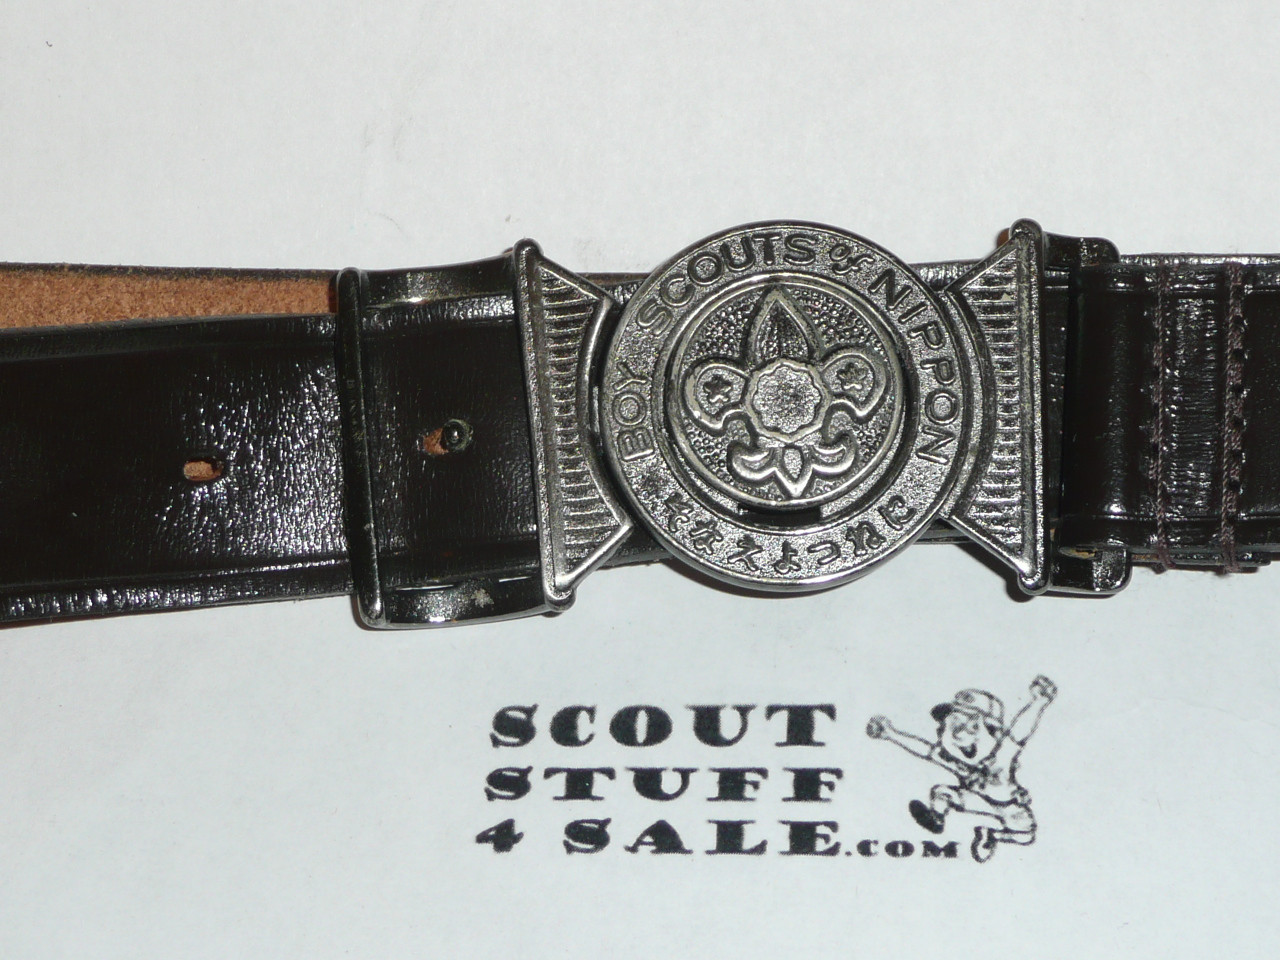 Boy Scouts of Nippon Cast Belt Buckle on Leather Belt, Very good condition